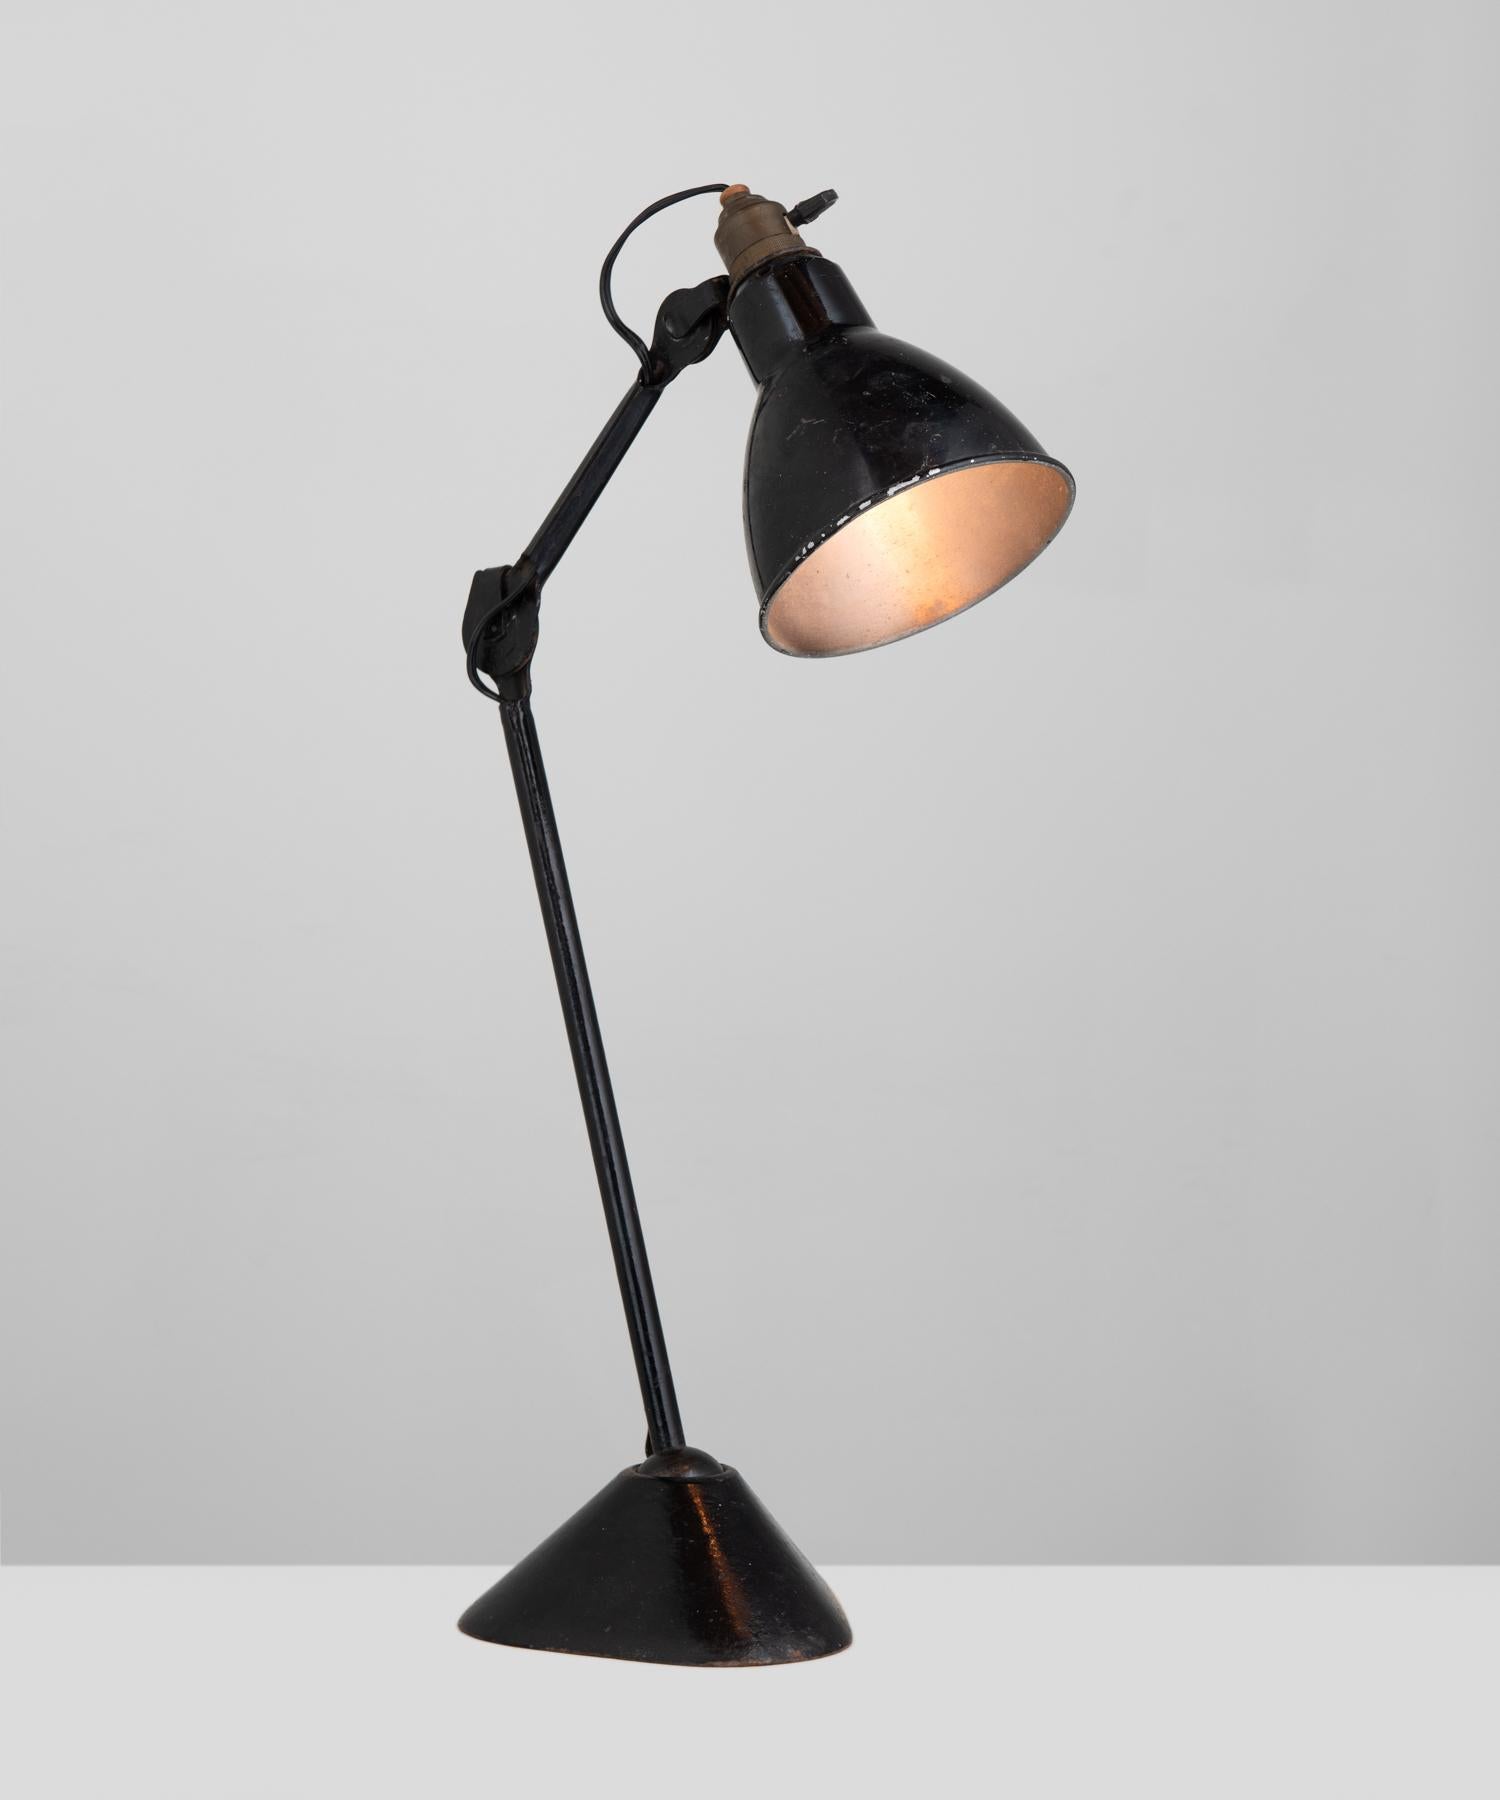 Gras lamp no. 205, circa 1930.

Iconic design by Bernard-Albin Gras features a cast steel frame with three points of adjustment. Measurement from configuration shown in cover image.

Measures: 14.5